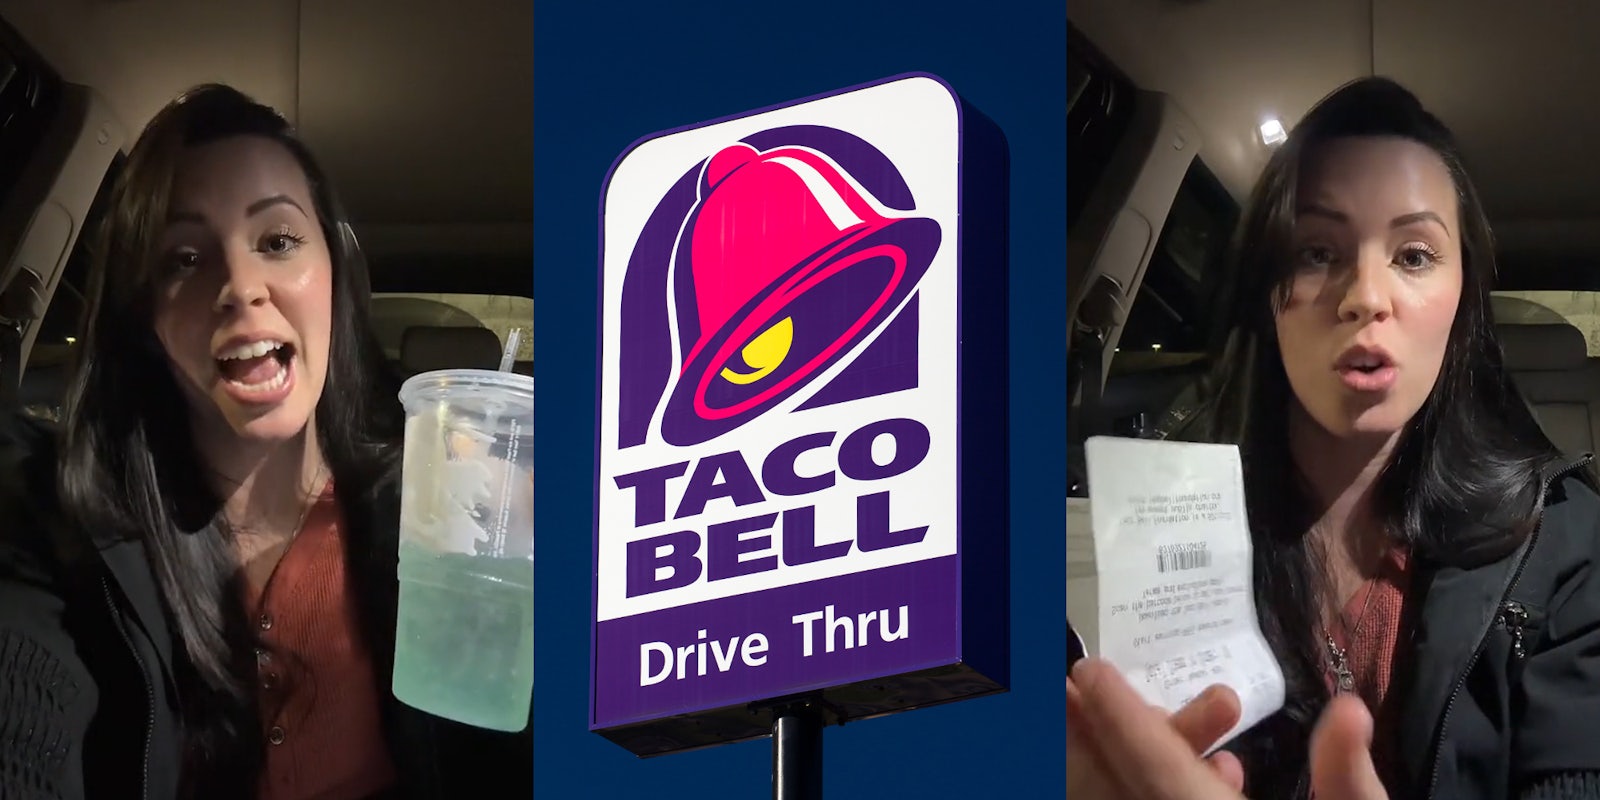 Taco Bell customer speaking in car (l) Taco Bell drive thru sign in front of blue sky (c) Taco Bell customer speaking in car holding receipt (r)